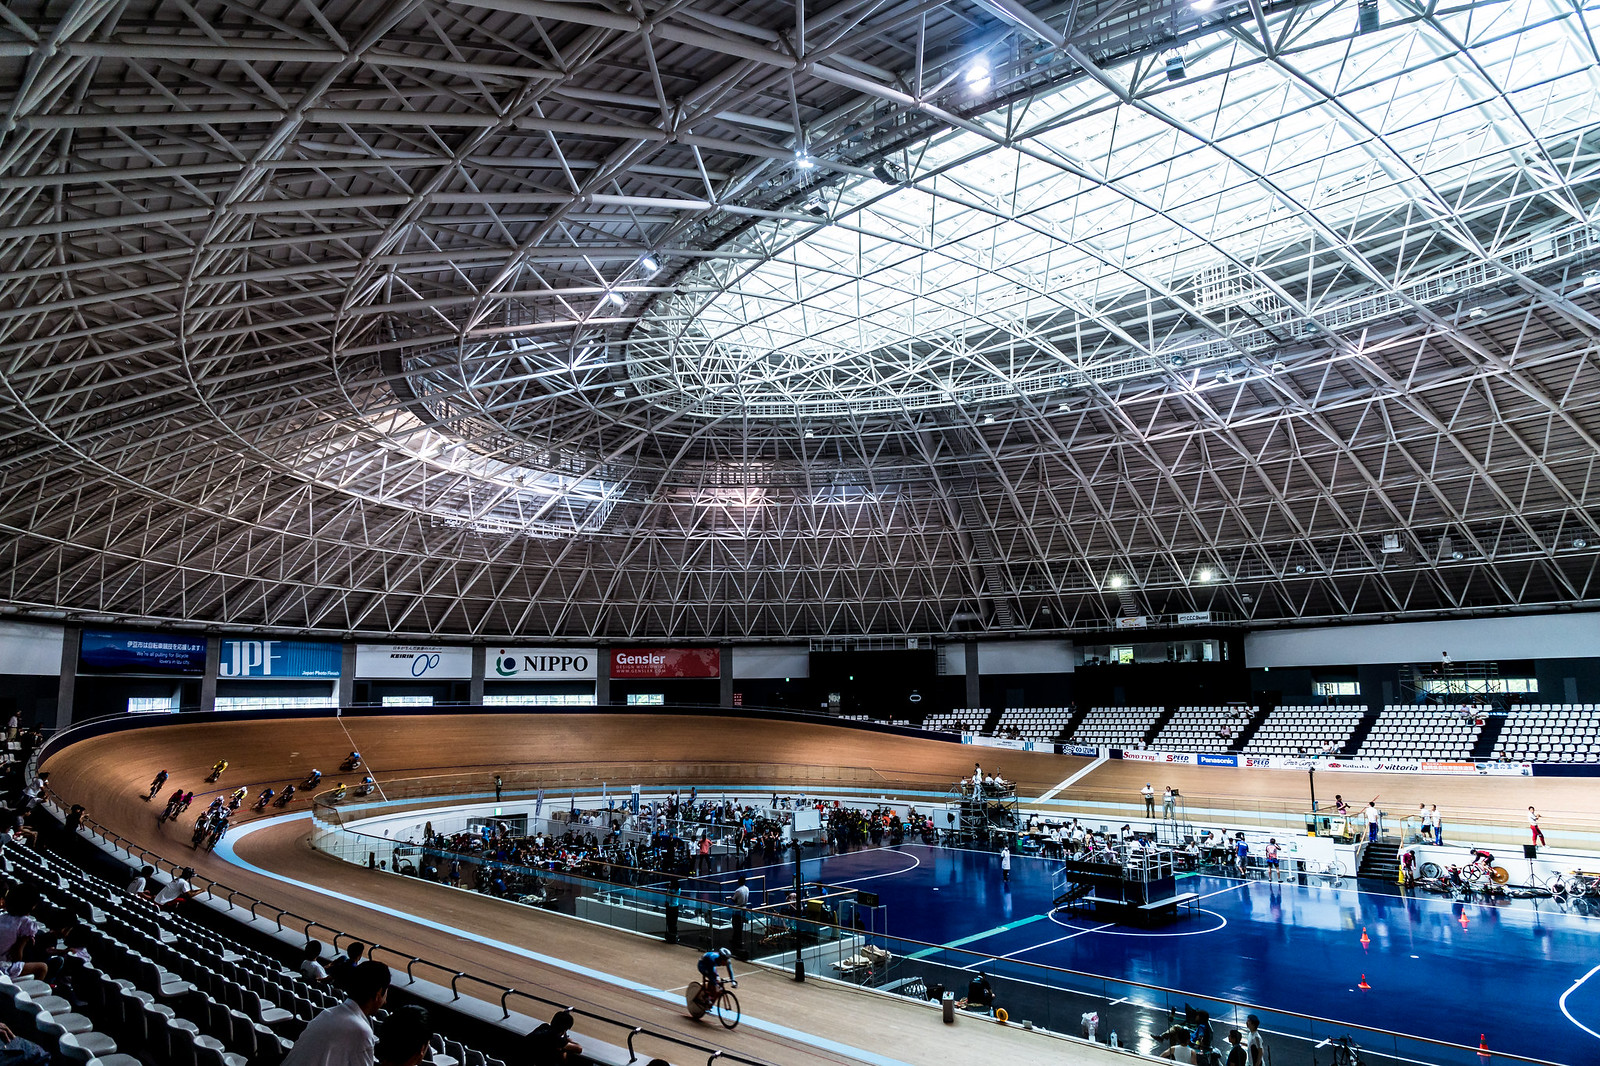 Izu velodrome, the cycling venues for the 2020 Tokyo Olympics